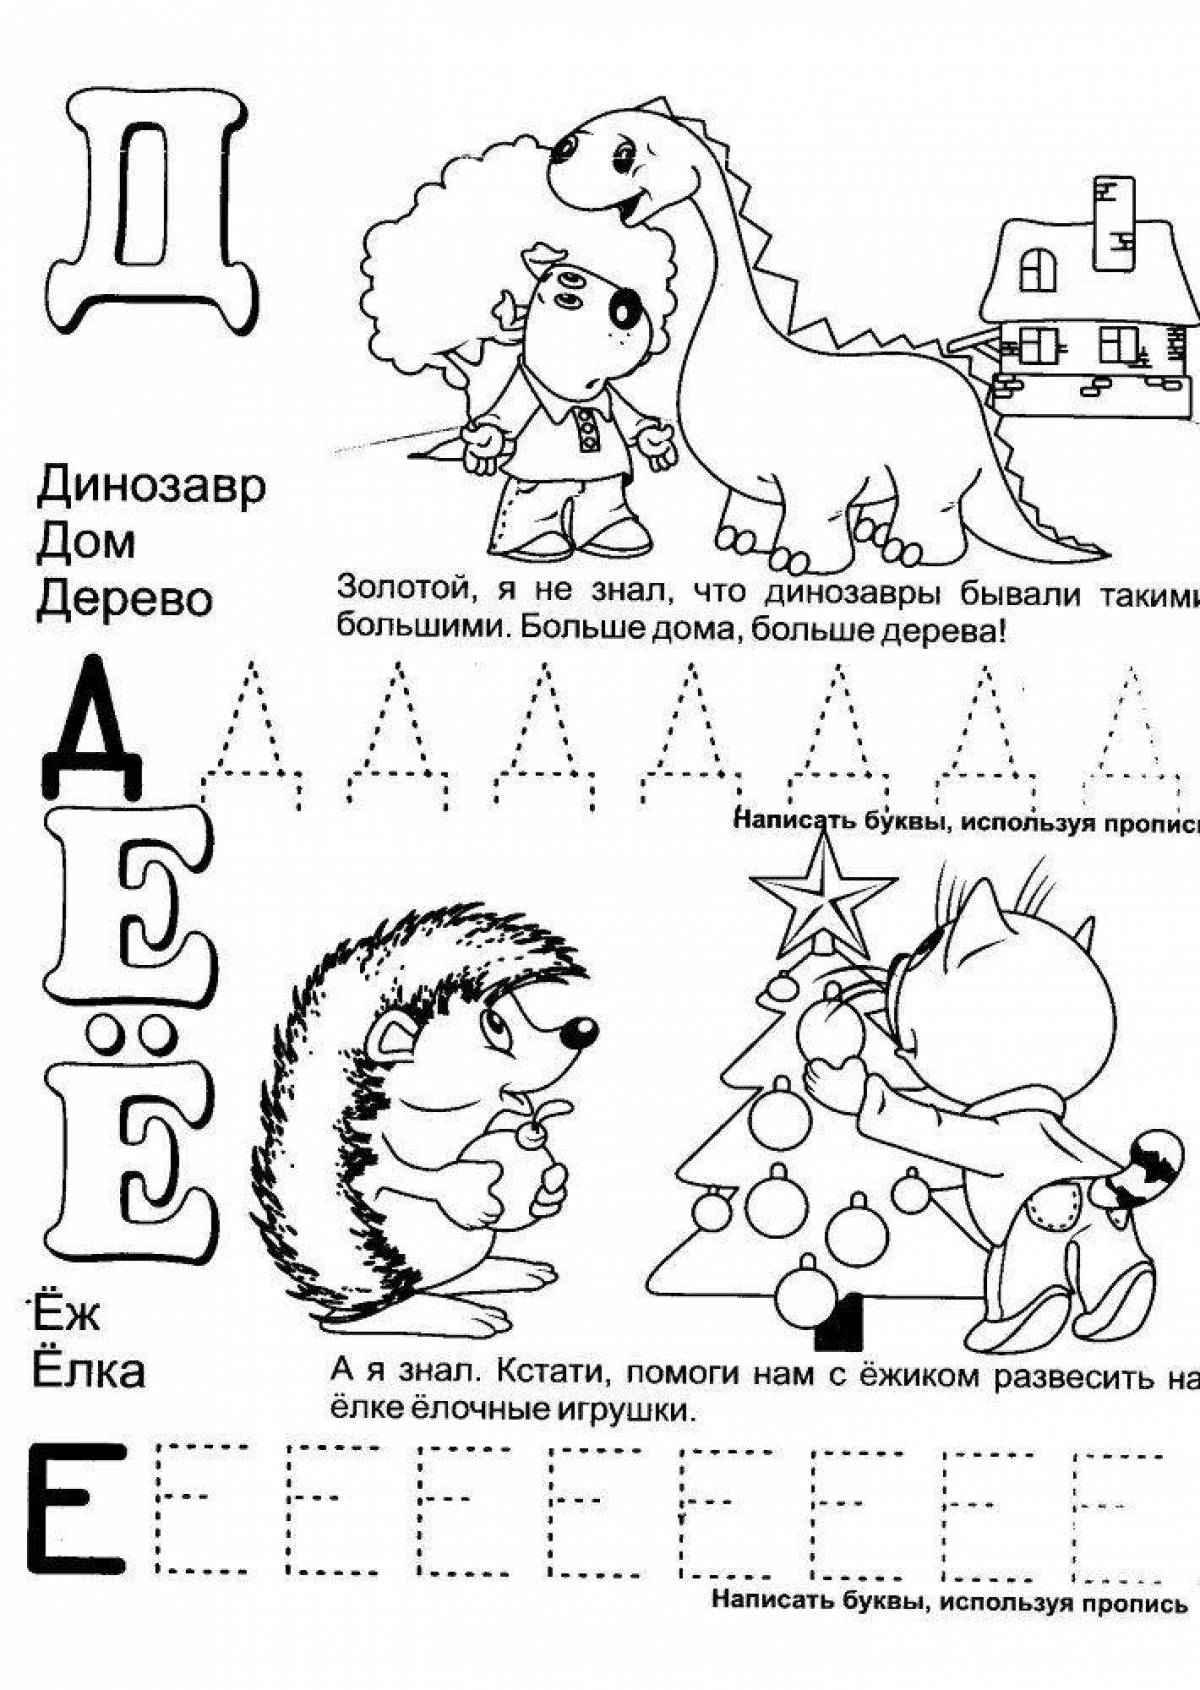 Playful letter coloring page for 5-6 year olds